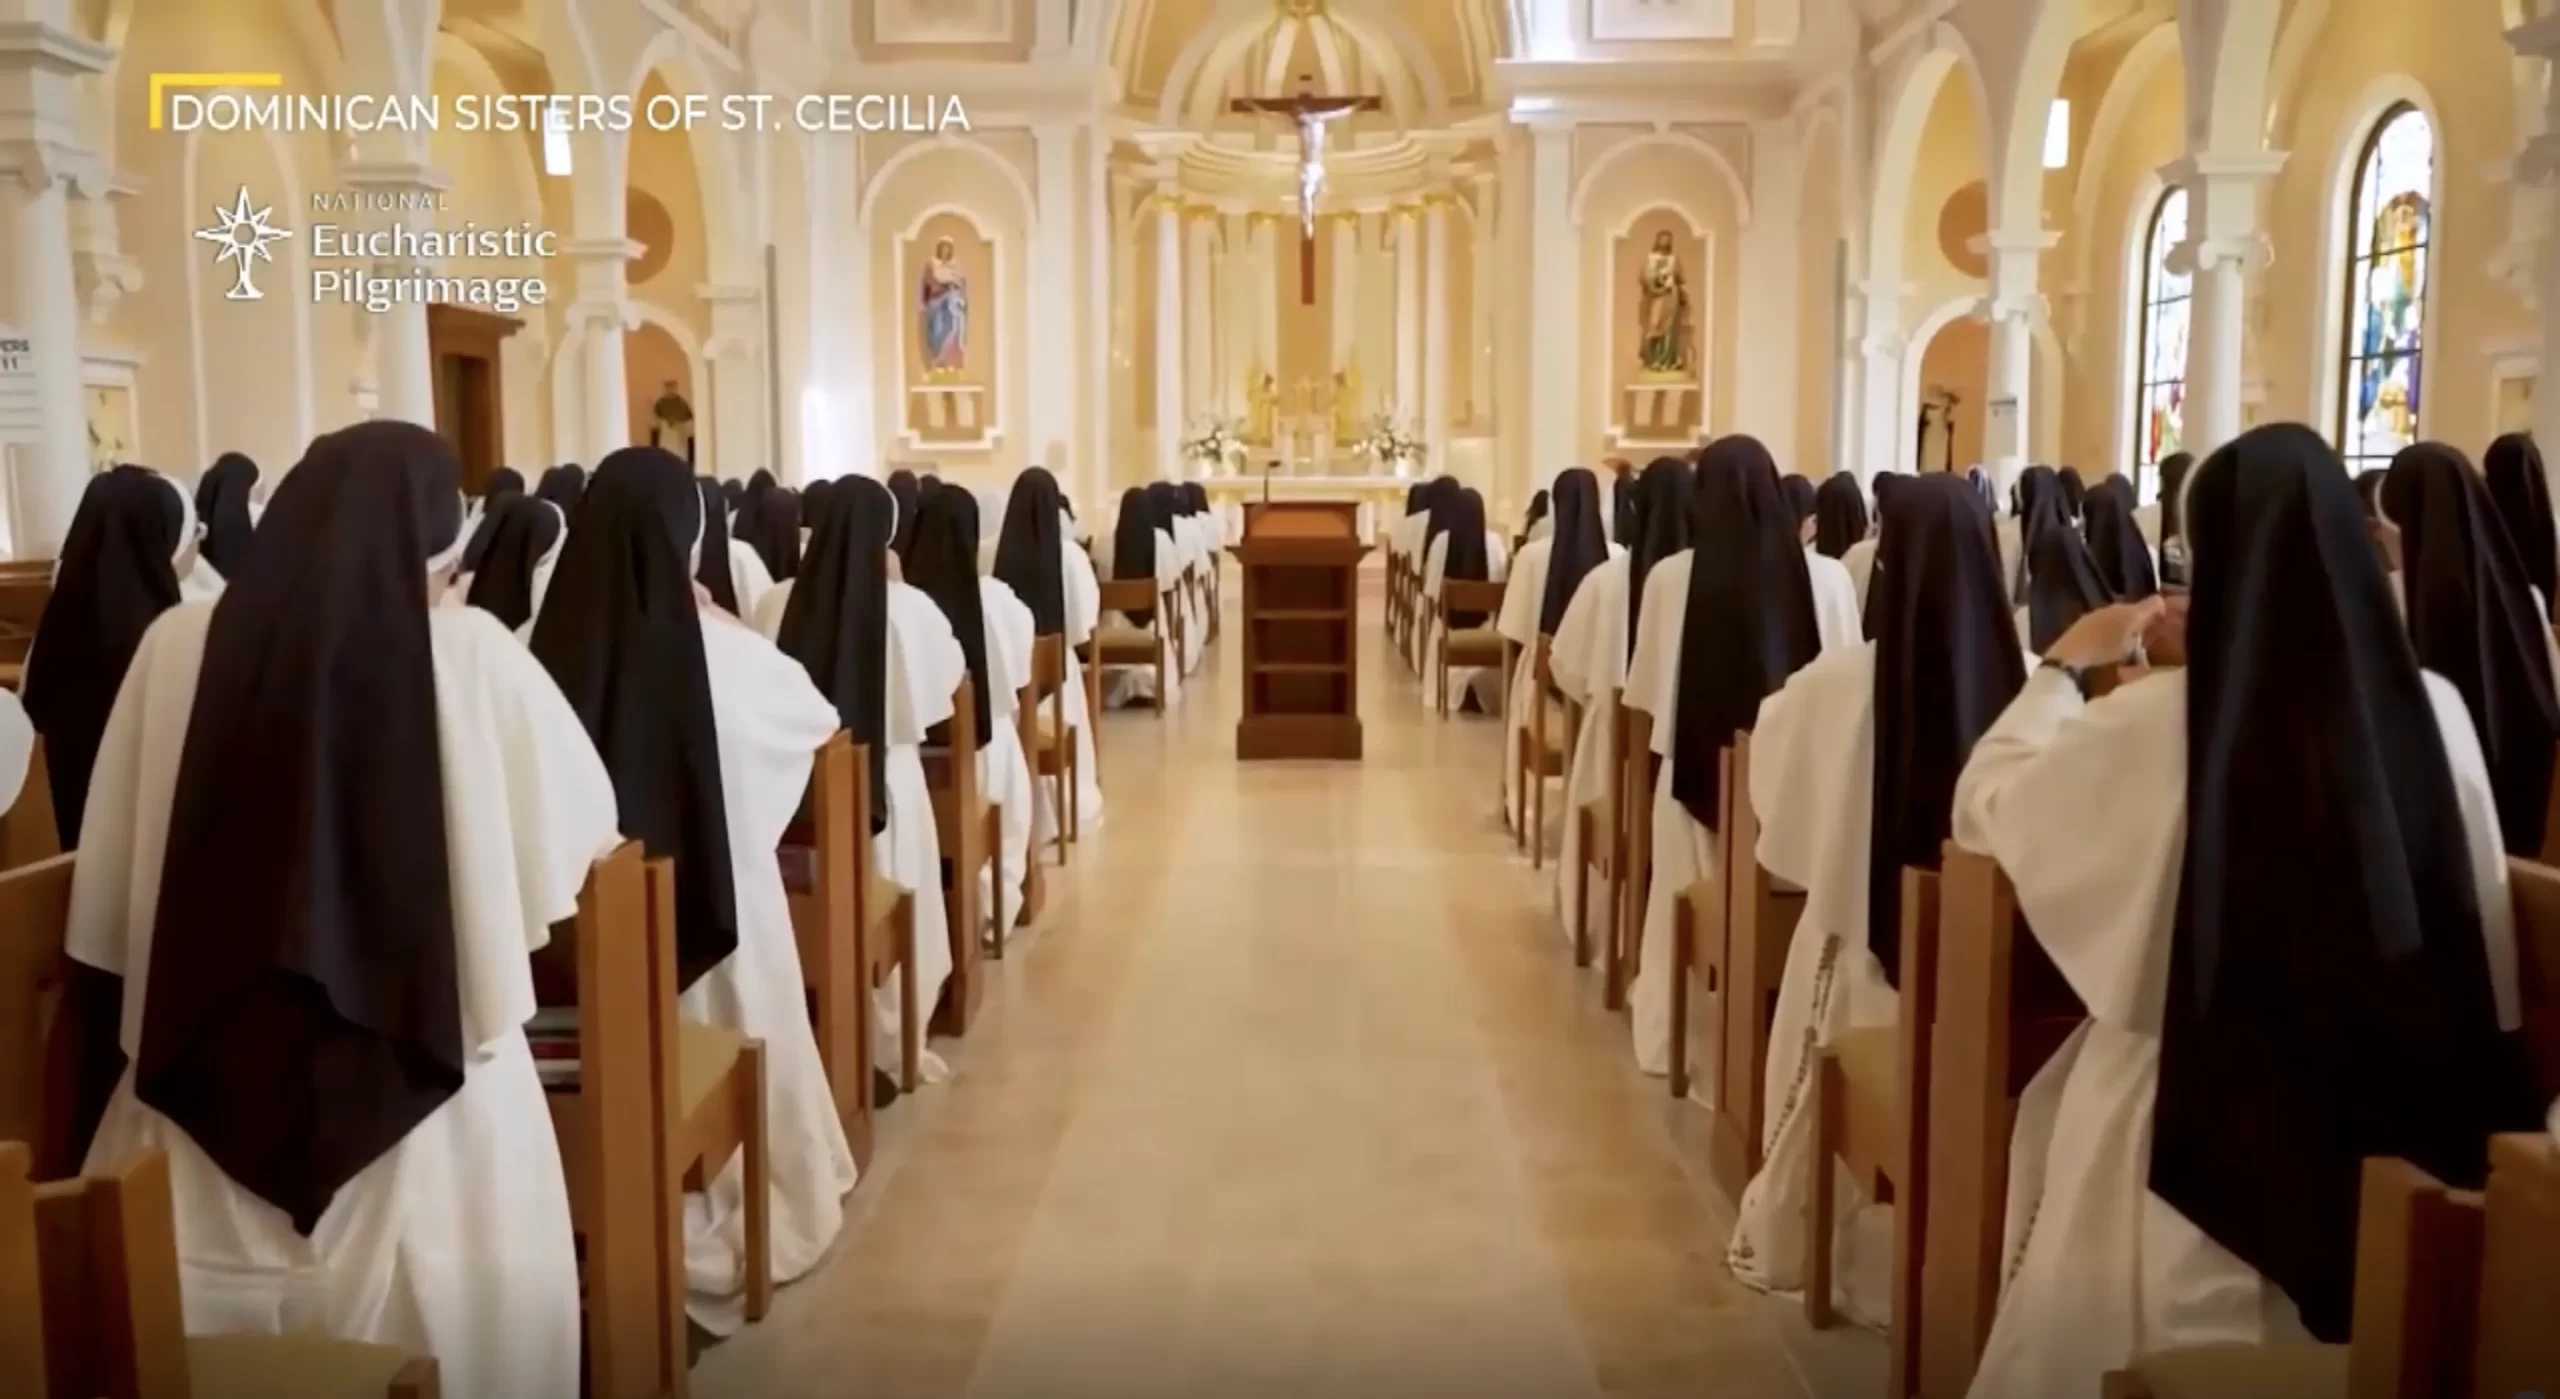 The motherhouse of the Dominican Sisters of St. Cecilia in Nashville, Tennessee. Credit: Screenshot from EWTN News In Depth